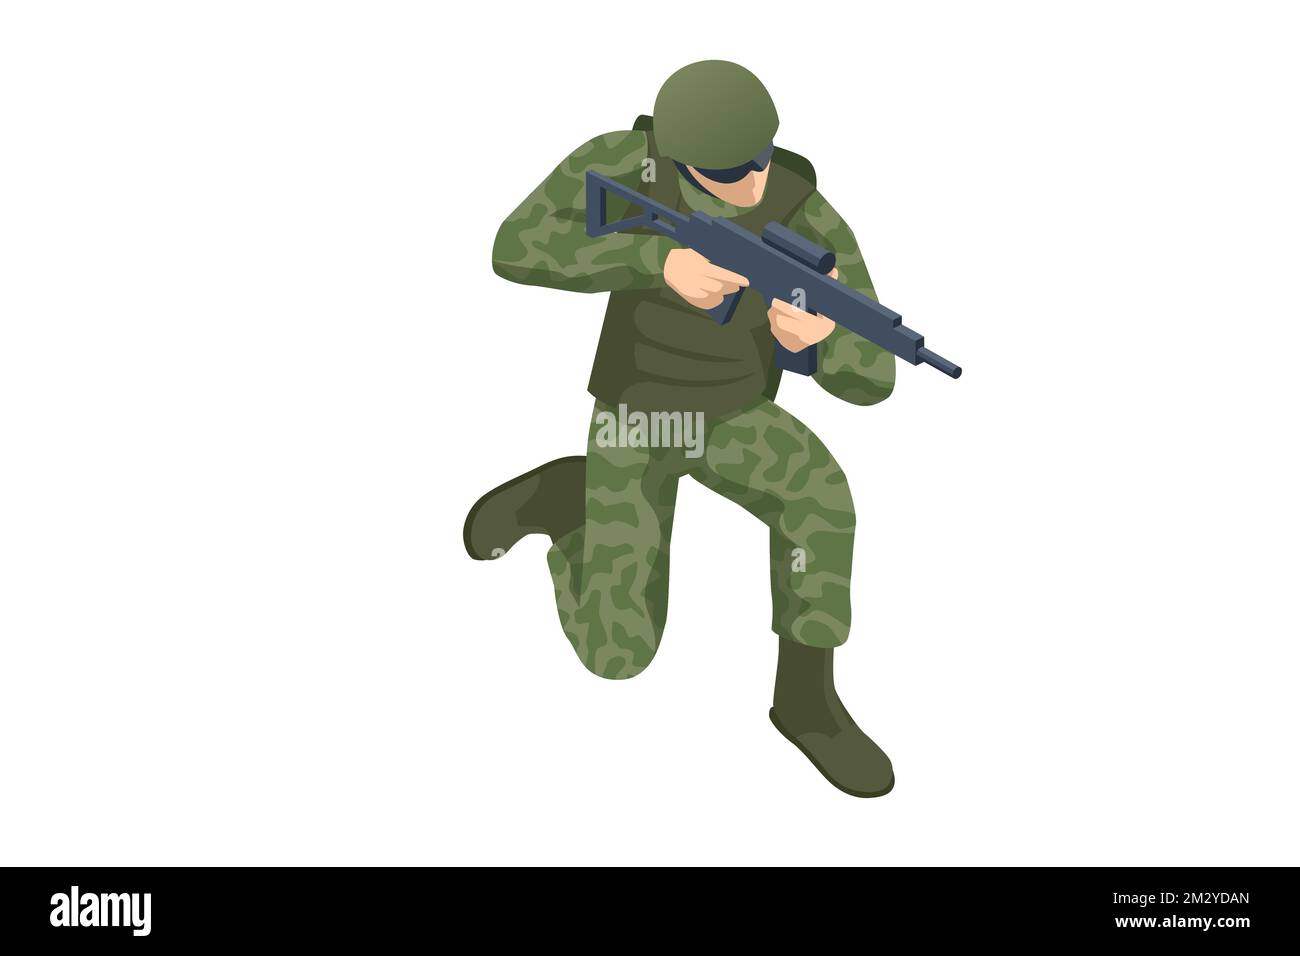 Us paratrooper Stock Vector Images - Alamy